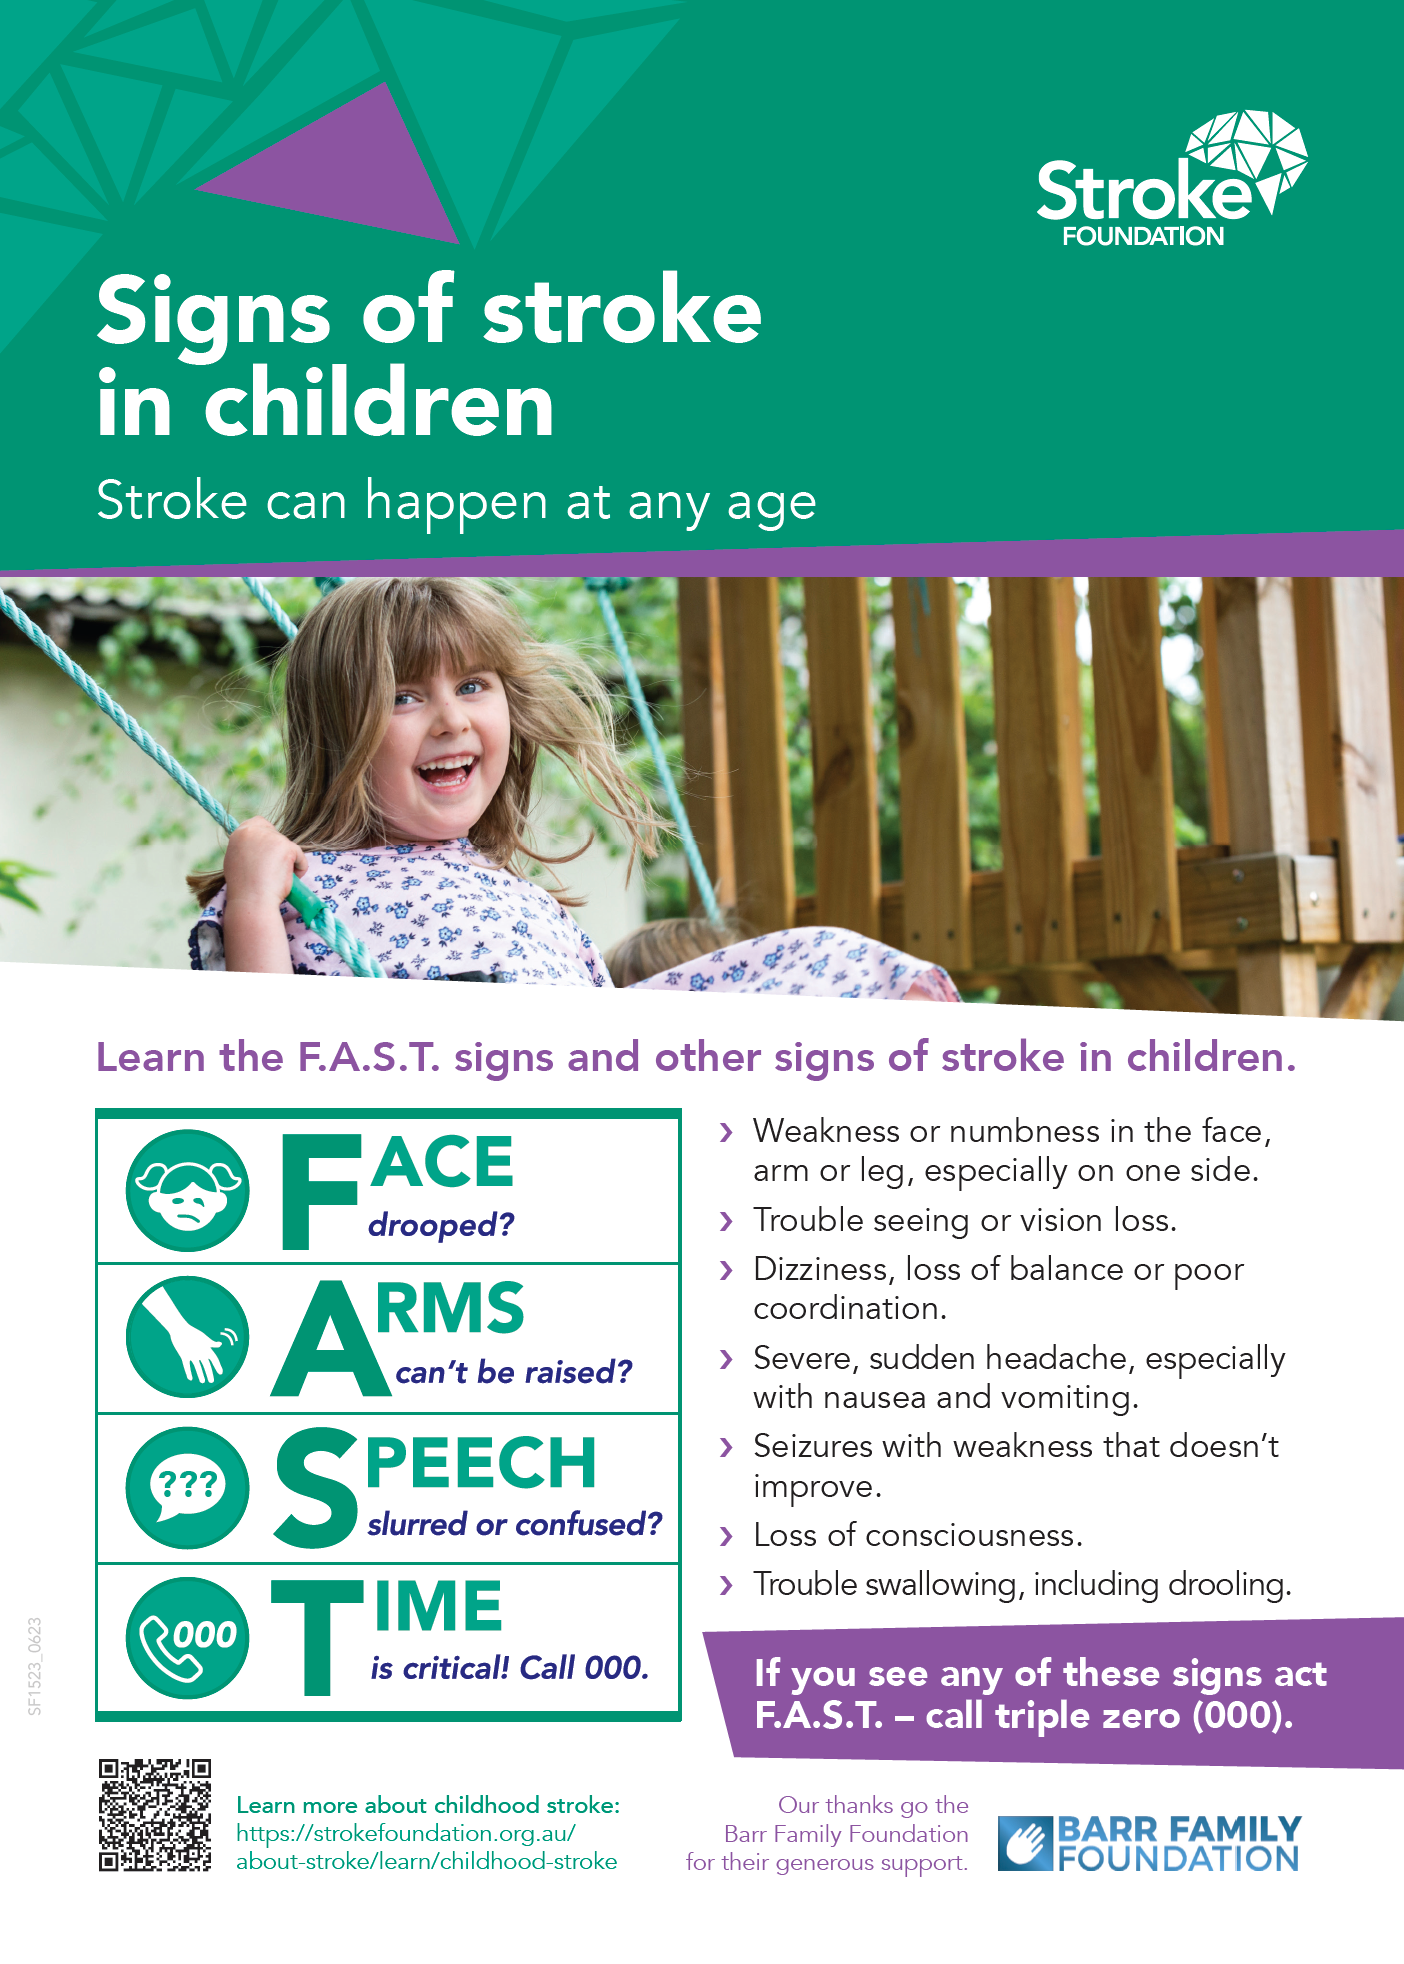 Signs of stroke in children poster